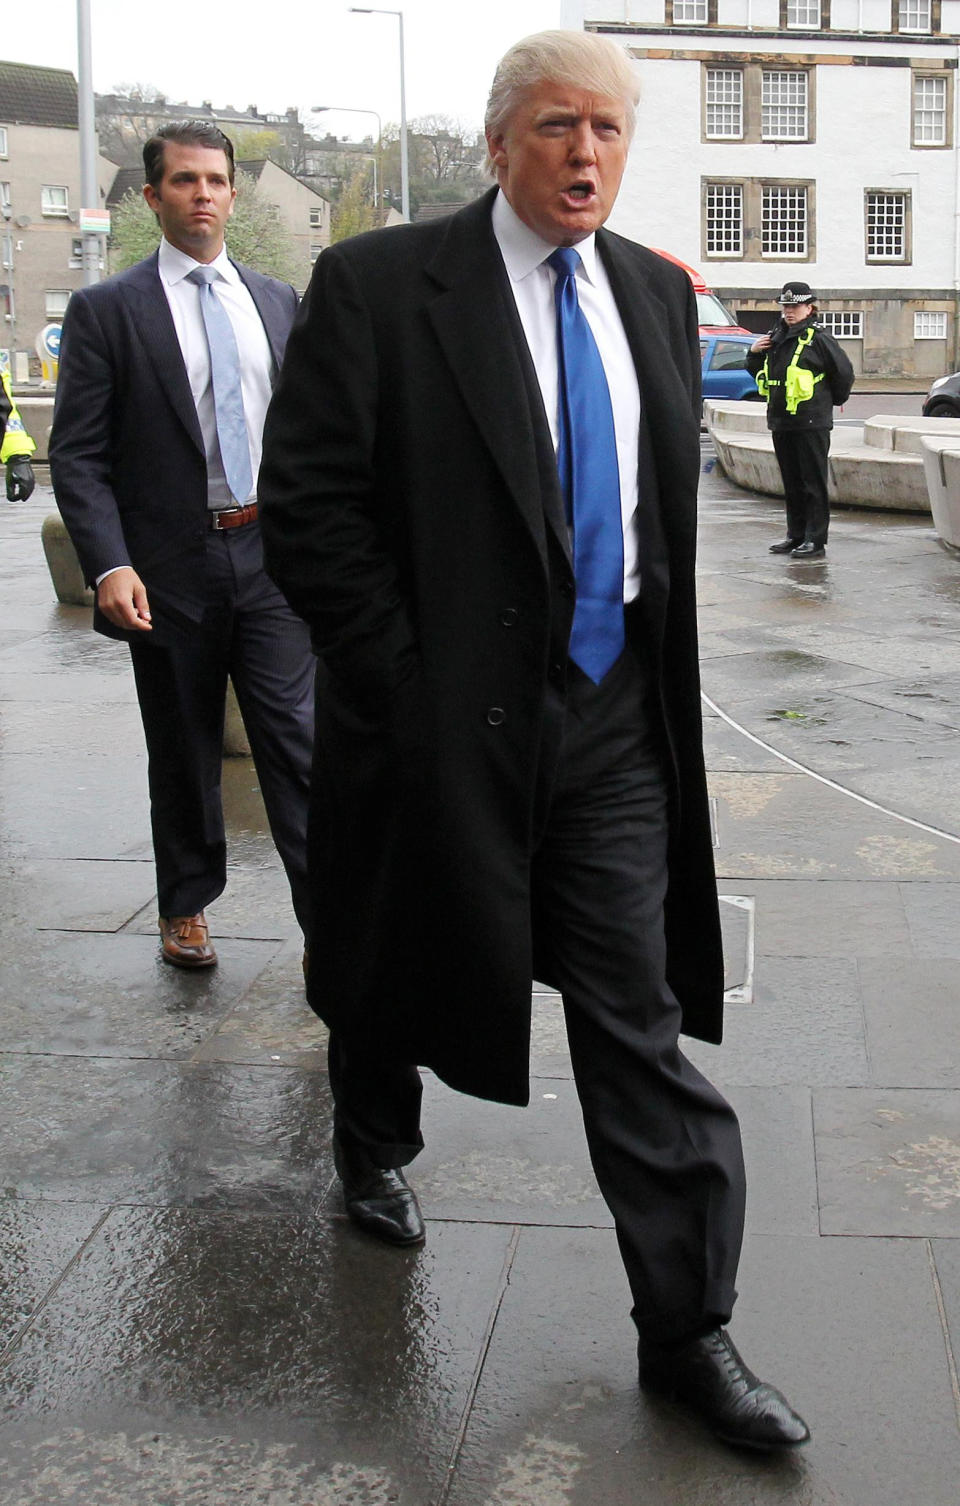 US business magnate Donald Trump and his son Donald Trump Jnr arrive at the Scottish Parliament in Edinburgh, Scotland, Wednesday April 25, 2012, where they will appear before the Scottish Parliament's Economy, Energy and Tourism Committee. Members of the committee are looking at how achievable the Scottish Government's green energy targets for 2020 are, with the meeting focusing on the impact the renewables industry could have on tourism and local communities. (AP Photo/PA, Andrew Milligan) UNITED KINGDOM OUT NO SALES NO ARCHIVE